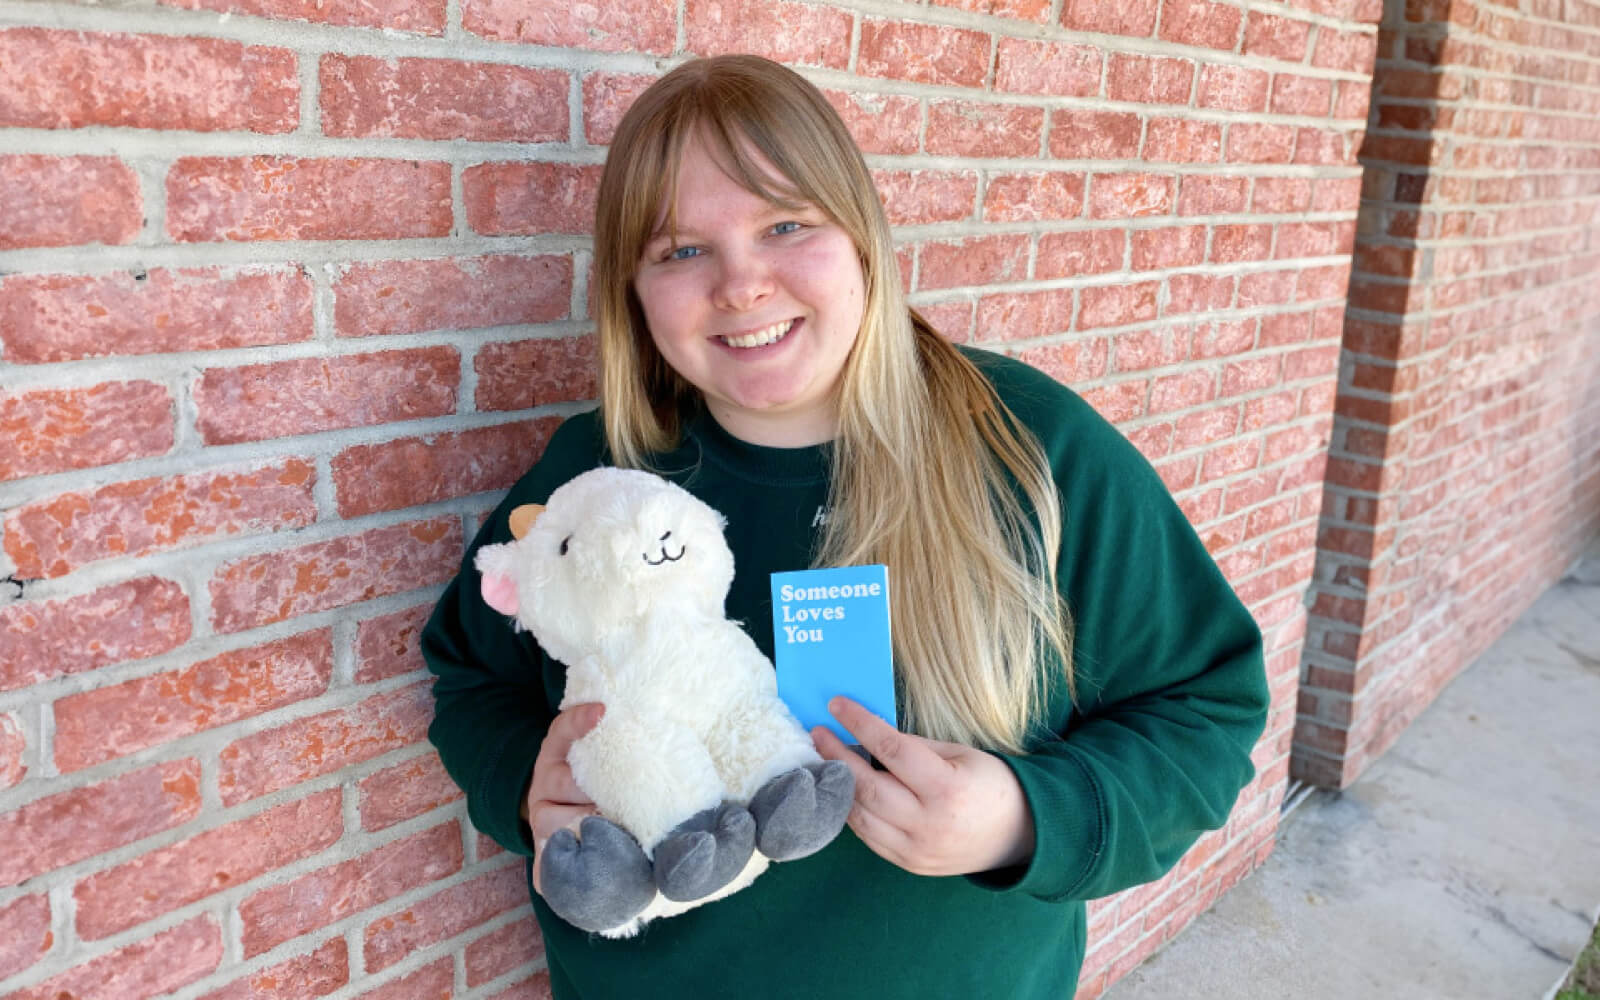 woman holding gus the goat stuffed animal and notecard